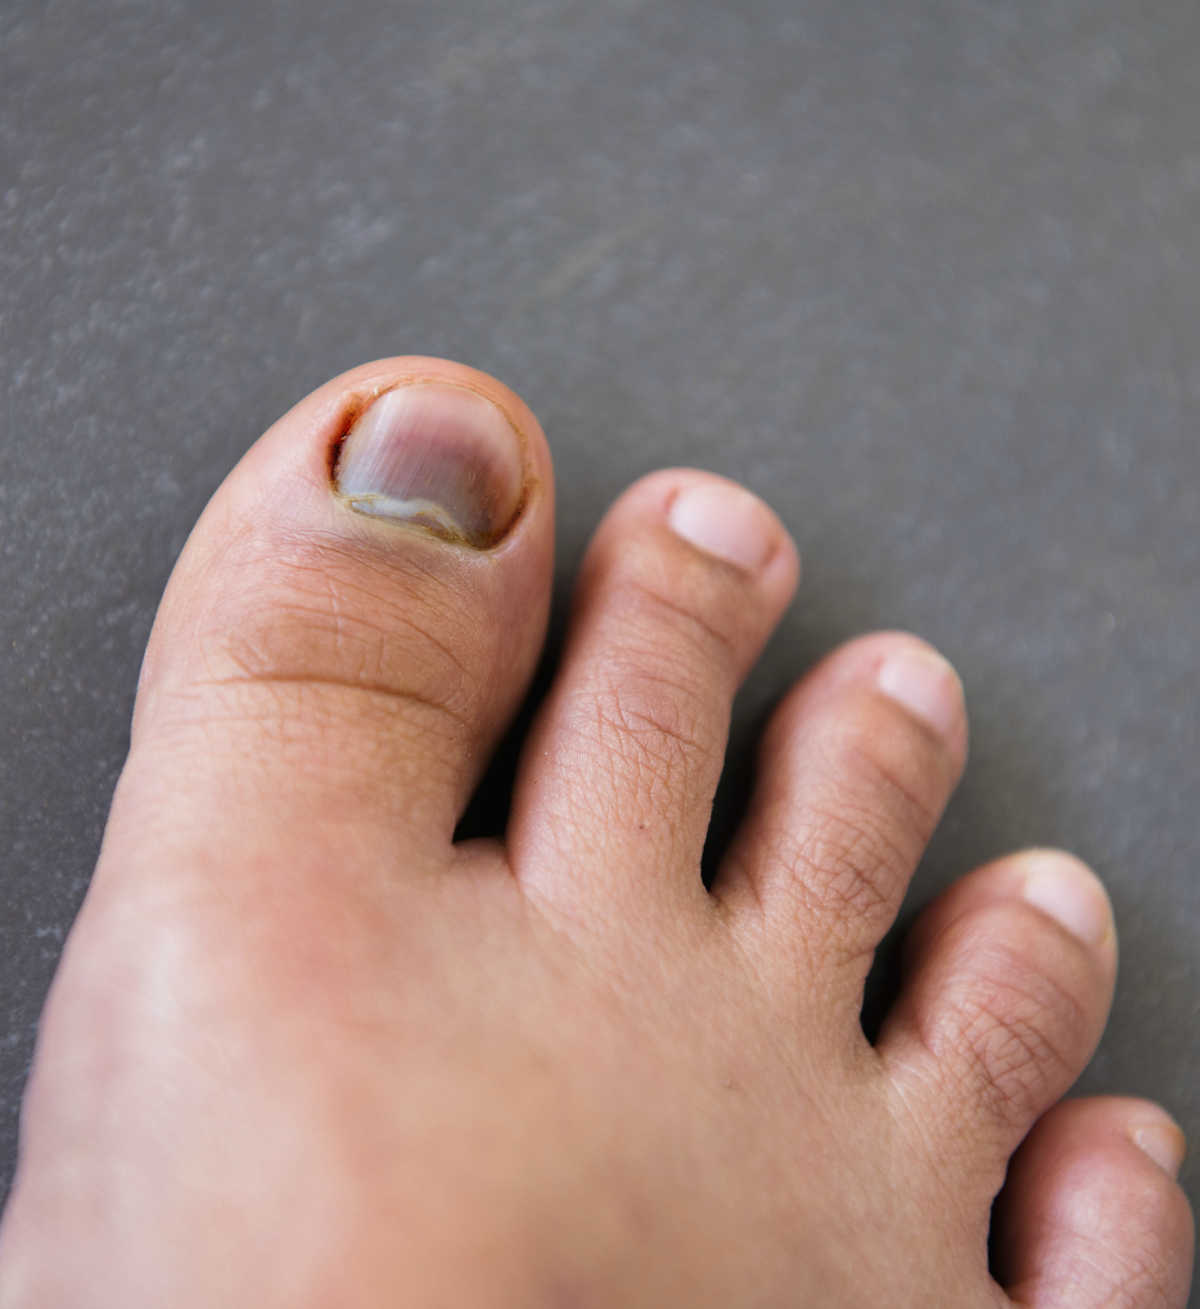 19 Health Problems That Show Up in Your Nails